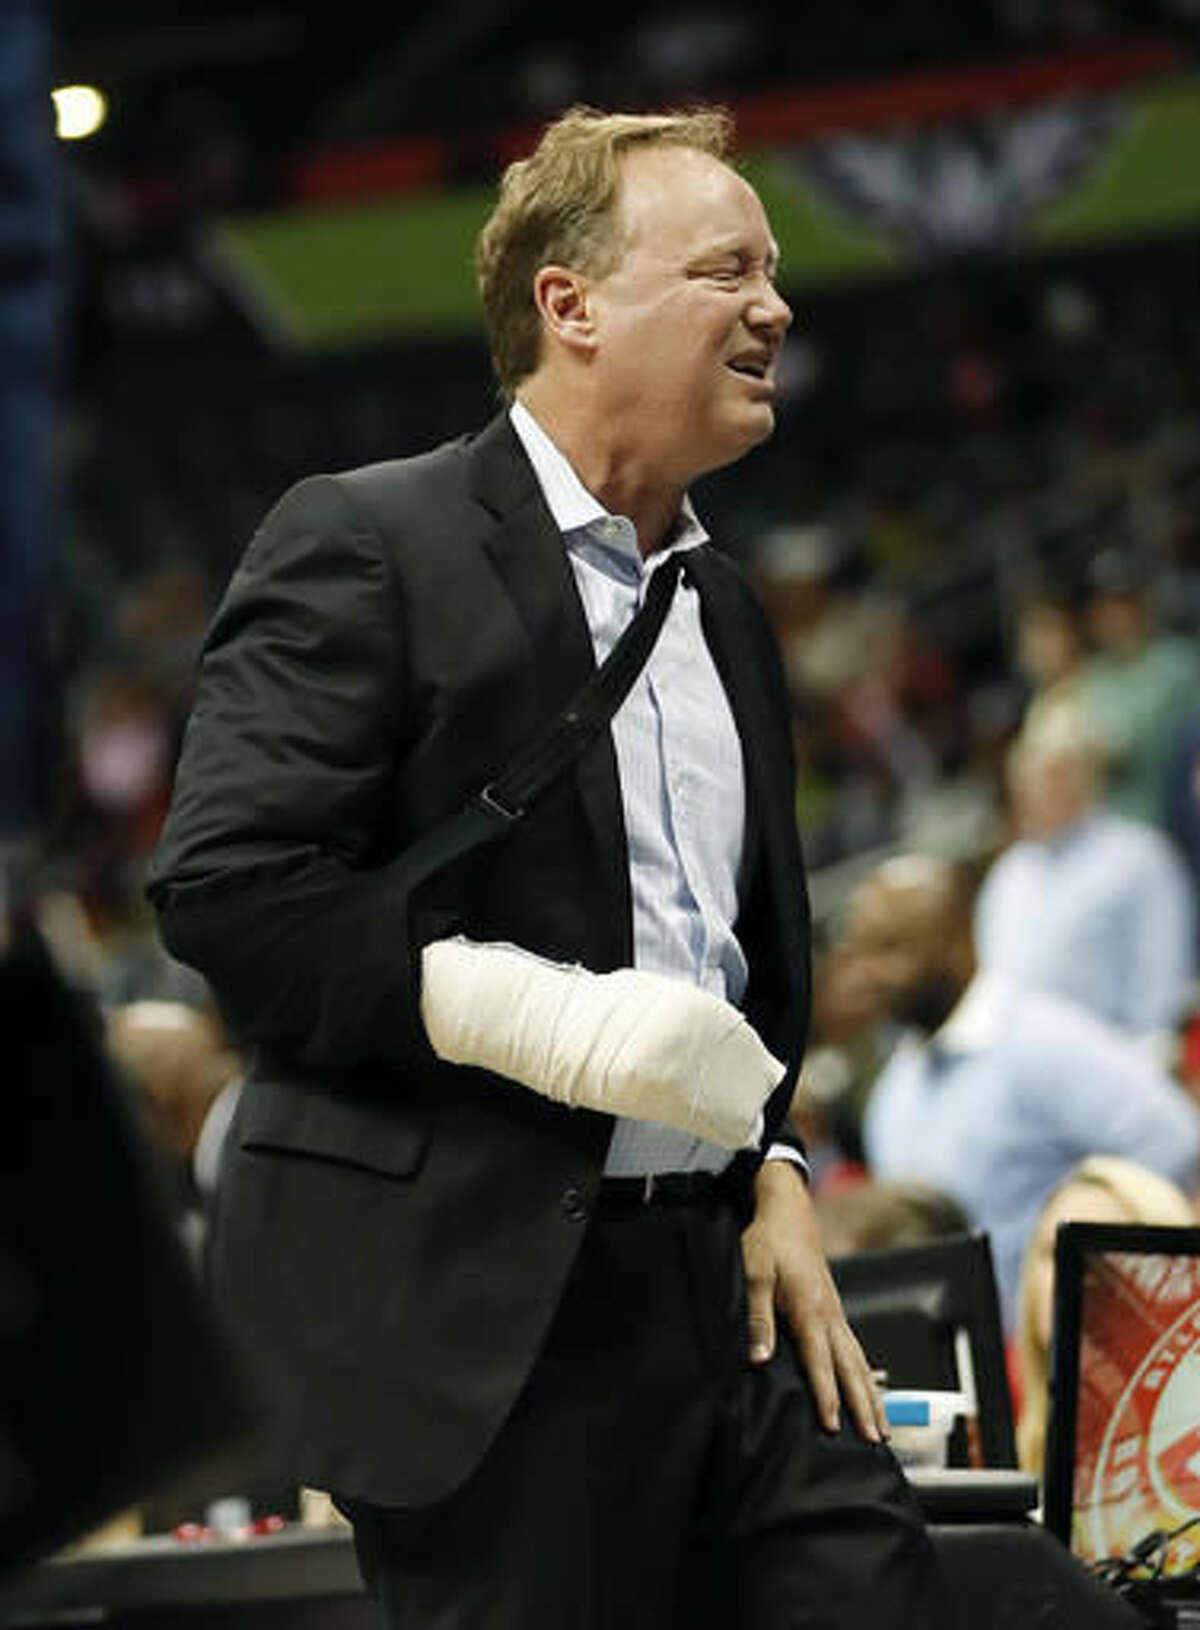 Atlanta Hawks coach Mike Budenholzer holds his leg and grimaces after he was run over on the sideline during the first half of the team's preseason NBA basketball game against the New Orleans Pelicans on Tuesday, Oct. 18, 2016, in Atlanta. Budenholzer, who was already nursing an injured hand, left the game. (AP Photo/John Bazemore)